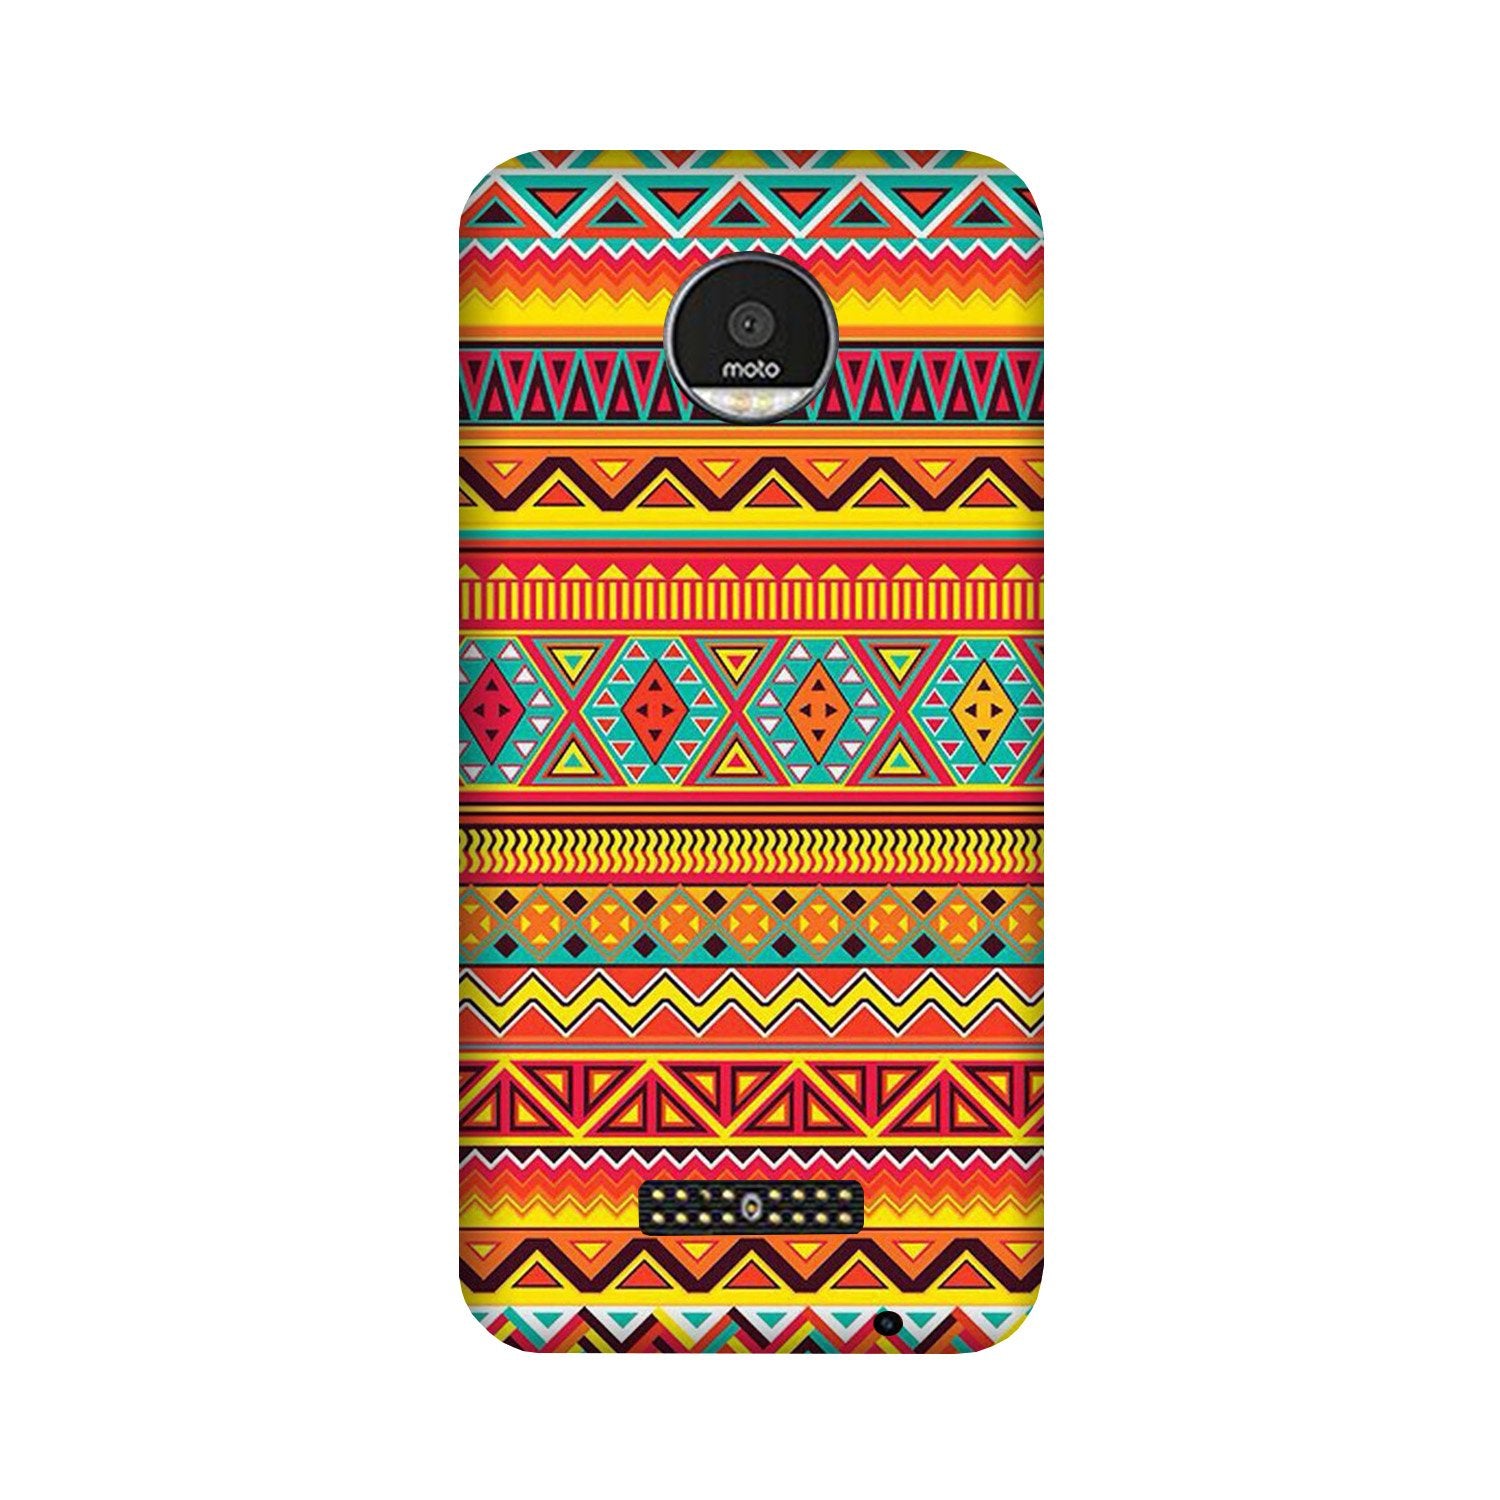 Zigzag line pattern Case for Moto Z2 Play